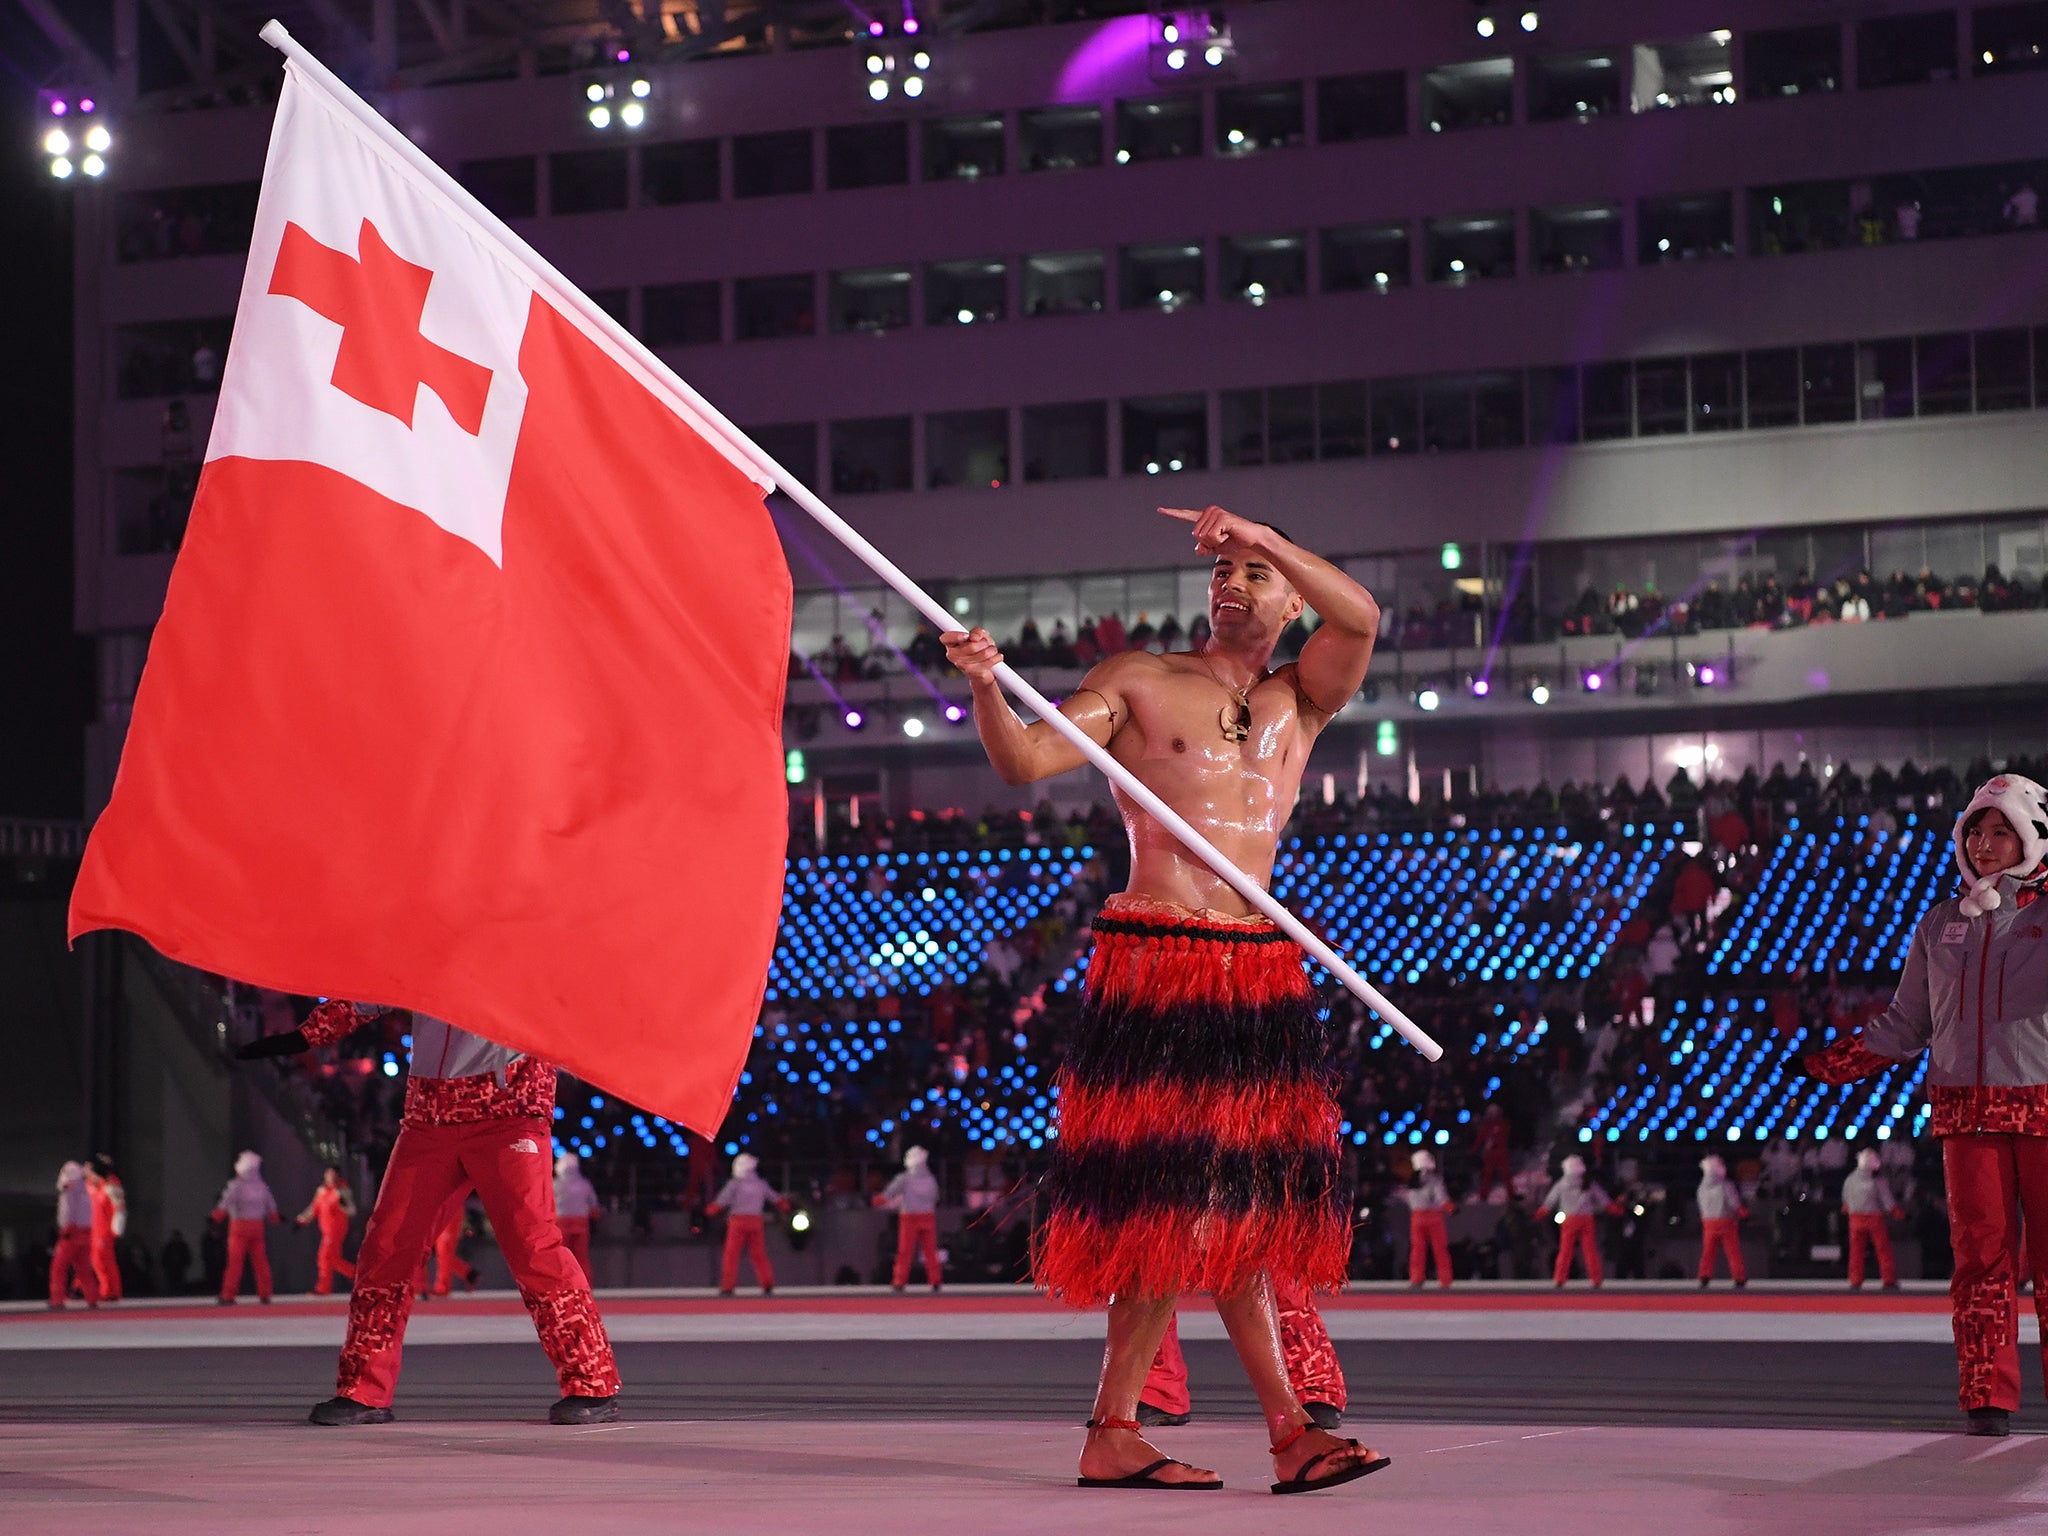 Taufatofua is the only Tongan competing at the 2018 Winter Olympics